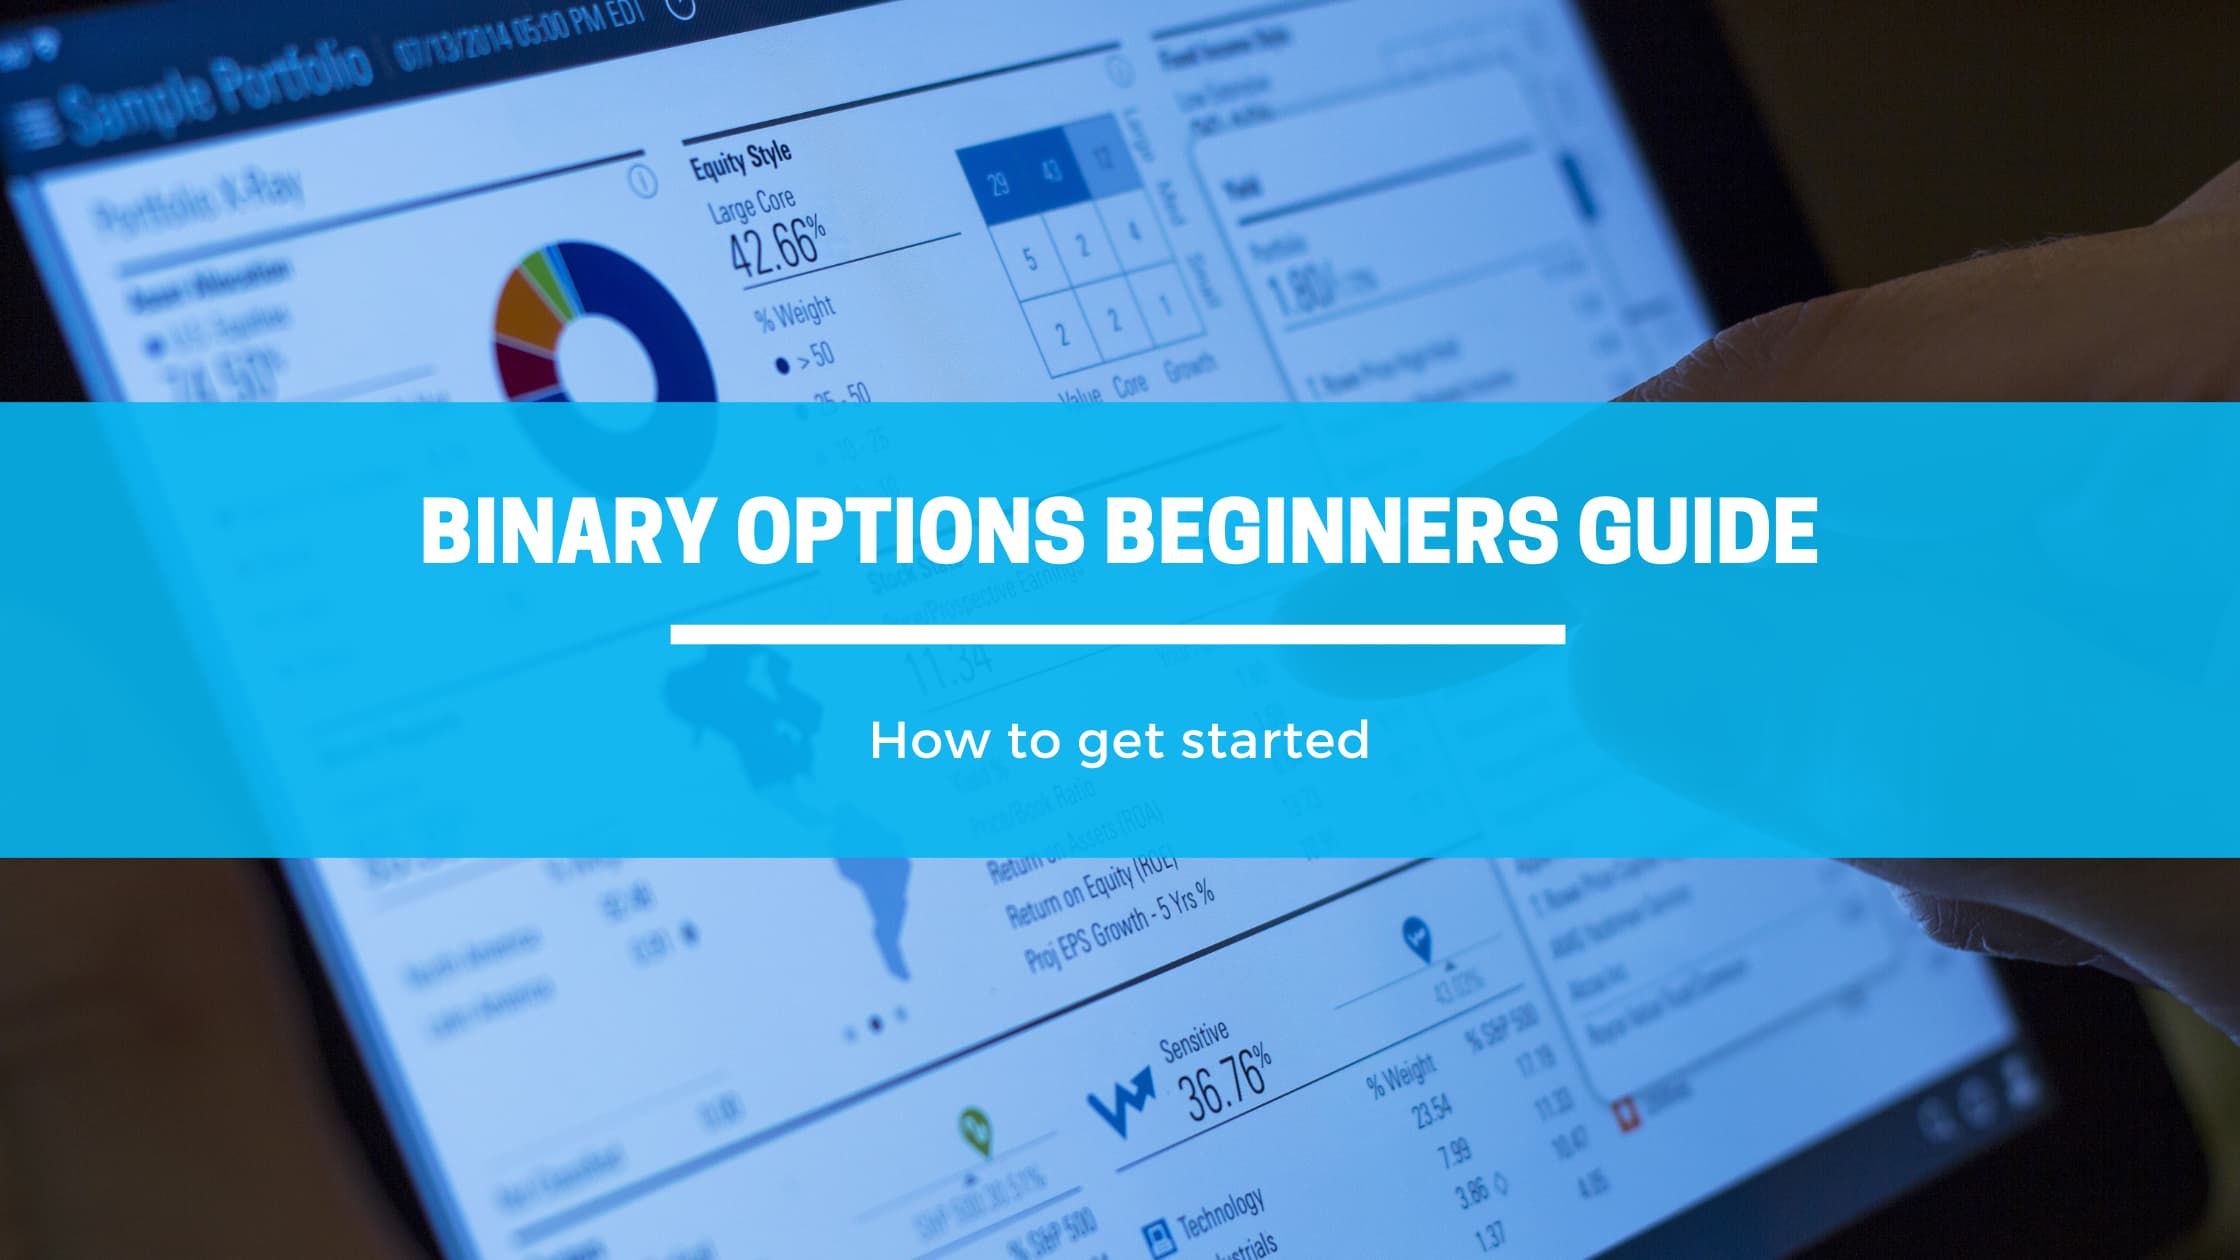 Guide To Binary Options for Beginners